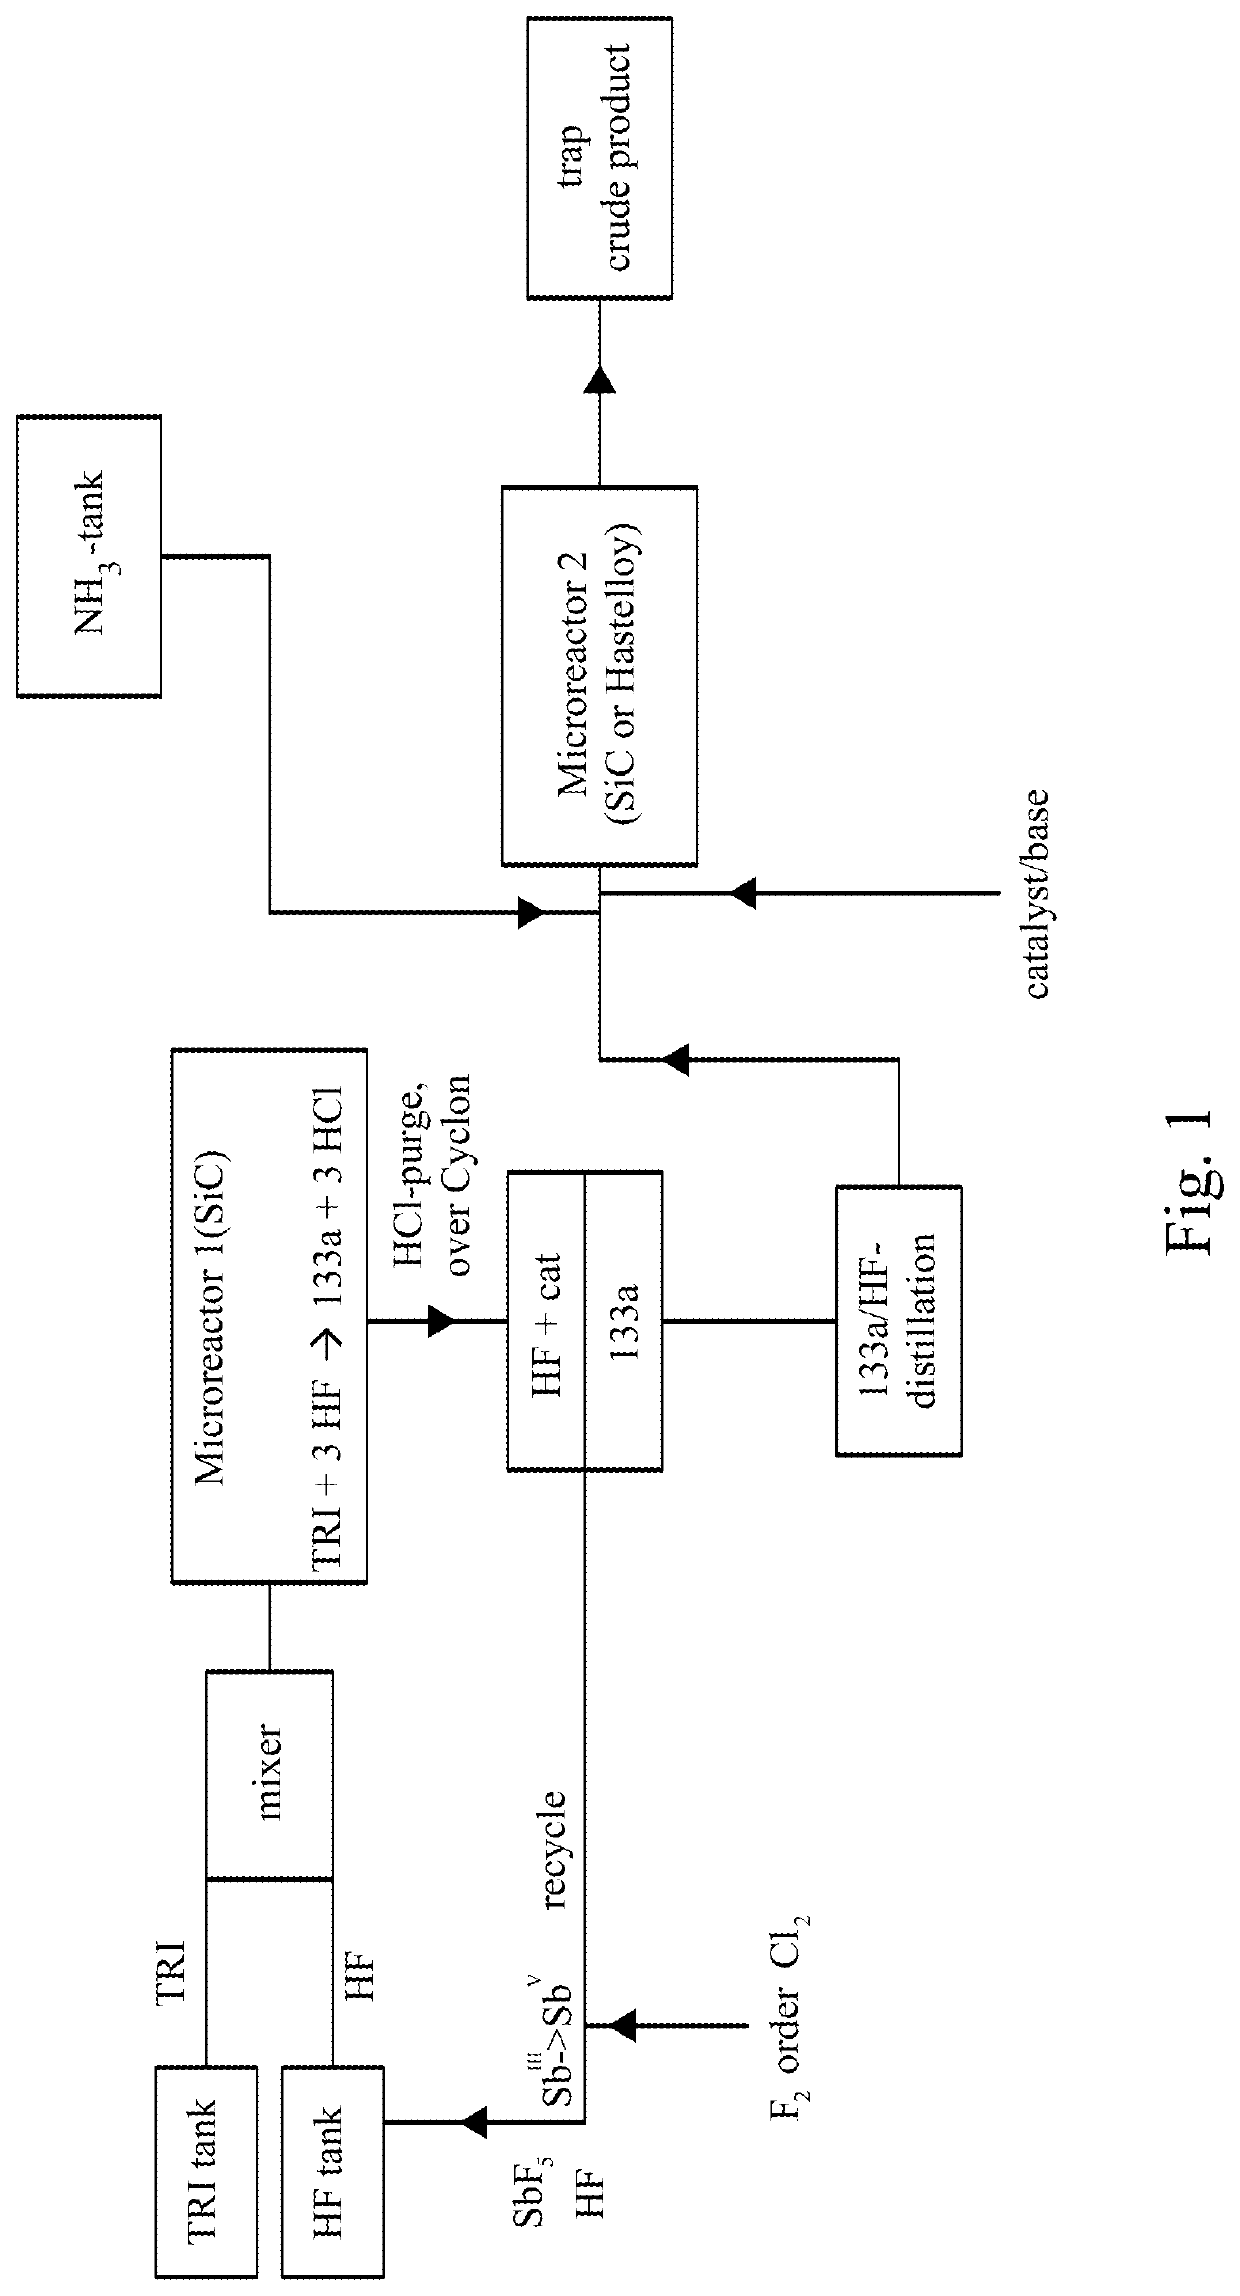 Process for the Manufacture of Trifluoroethylamine